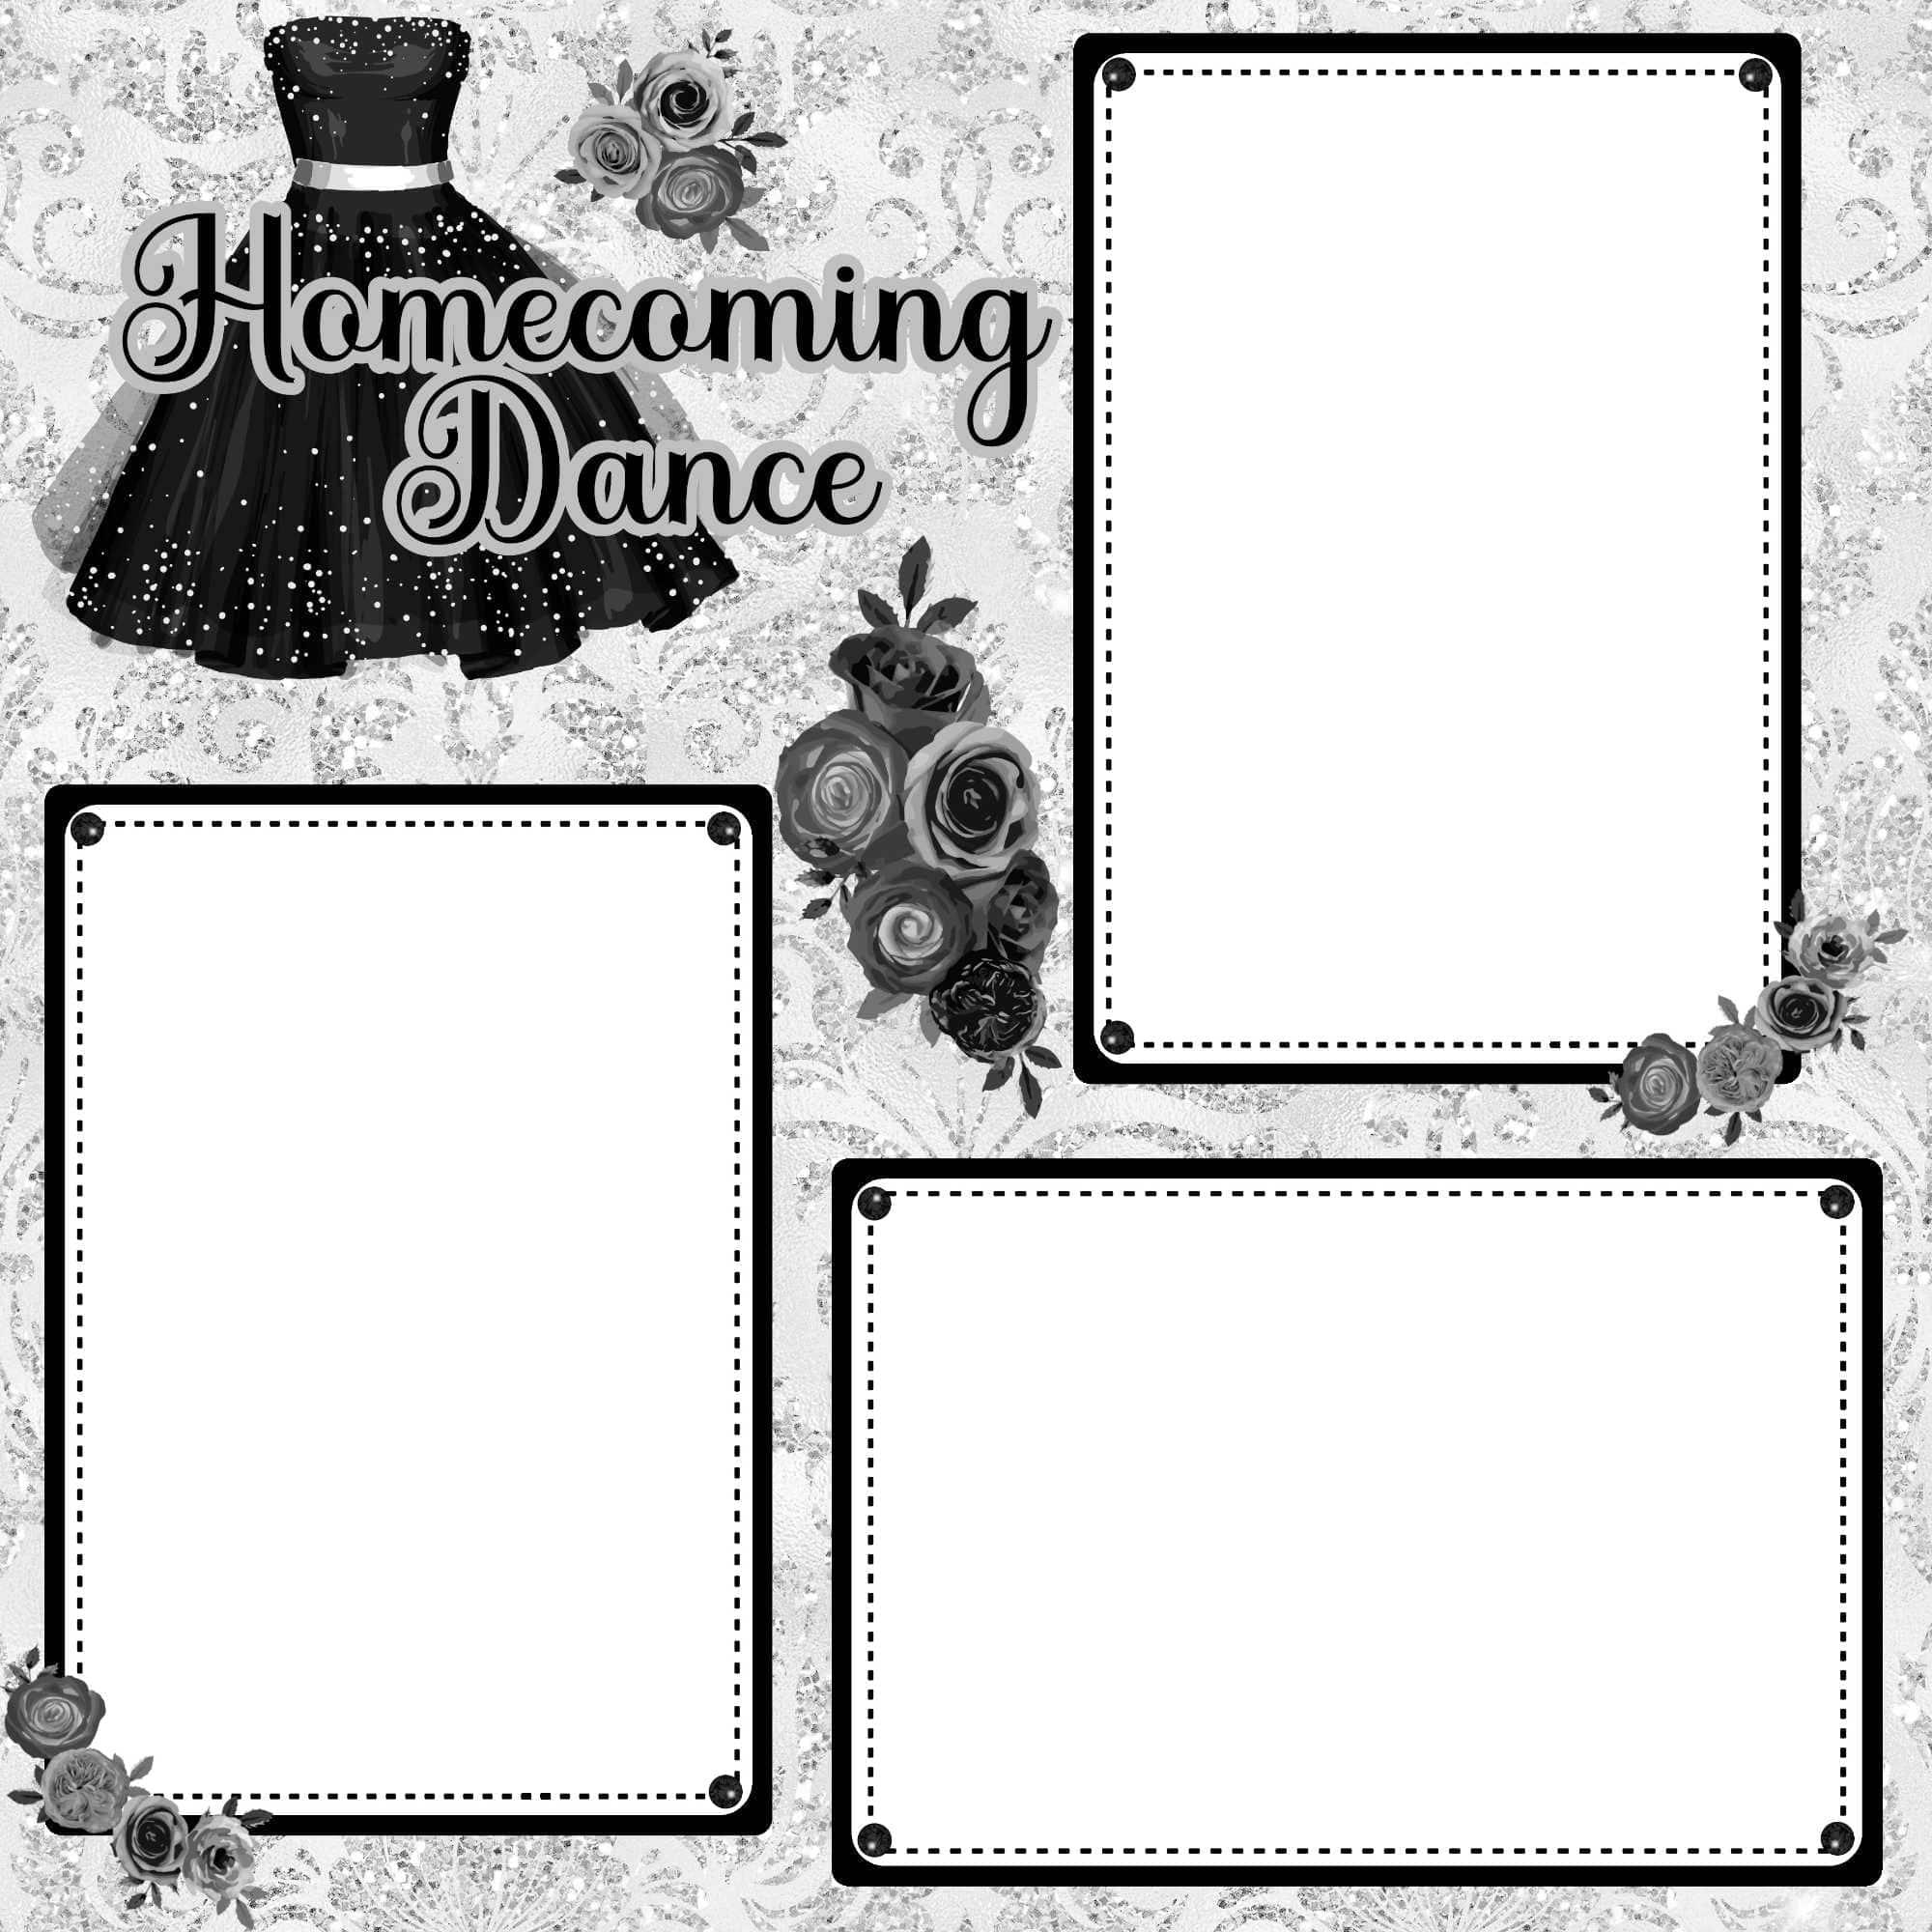 Homecoming Dance (2) - 12 x 12 Premade, Printed Scrapbook Pages by SSC Designs - Scrapbook Supply Companies